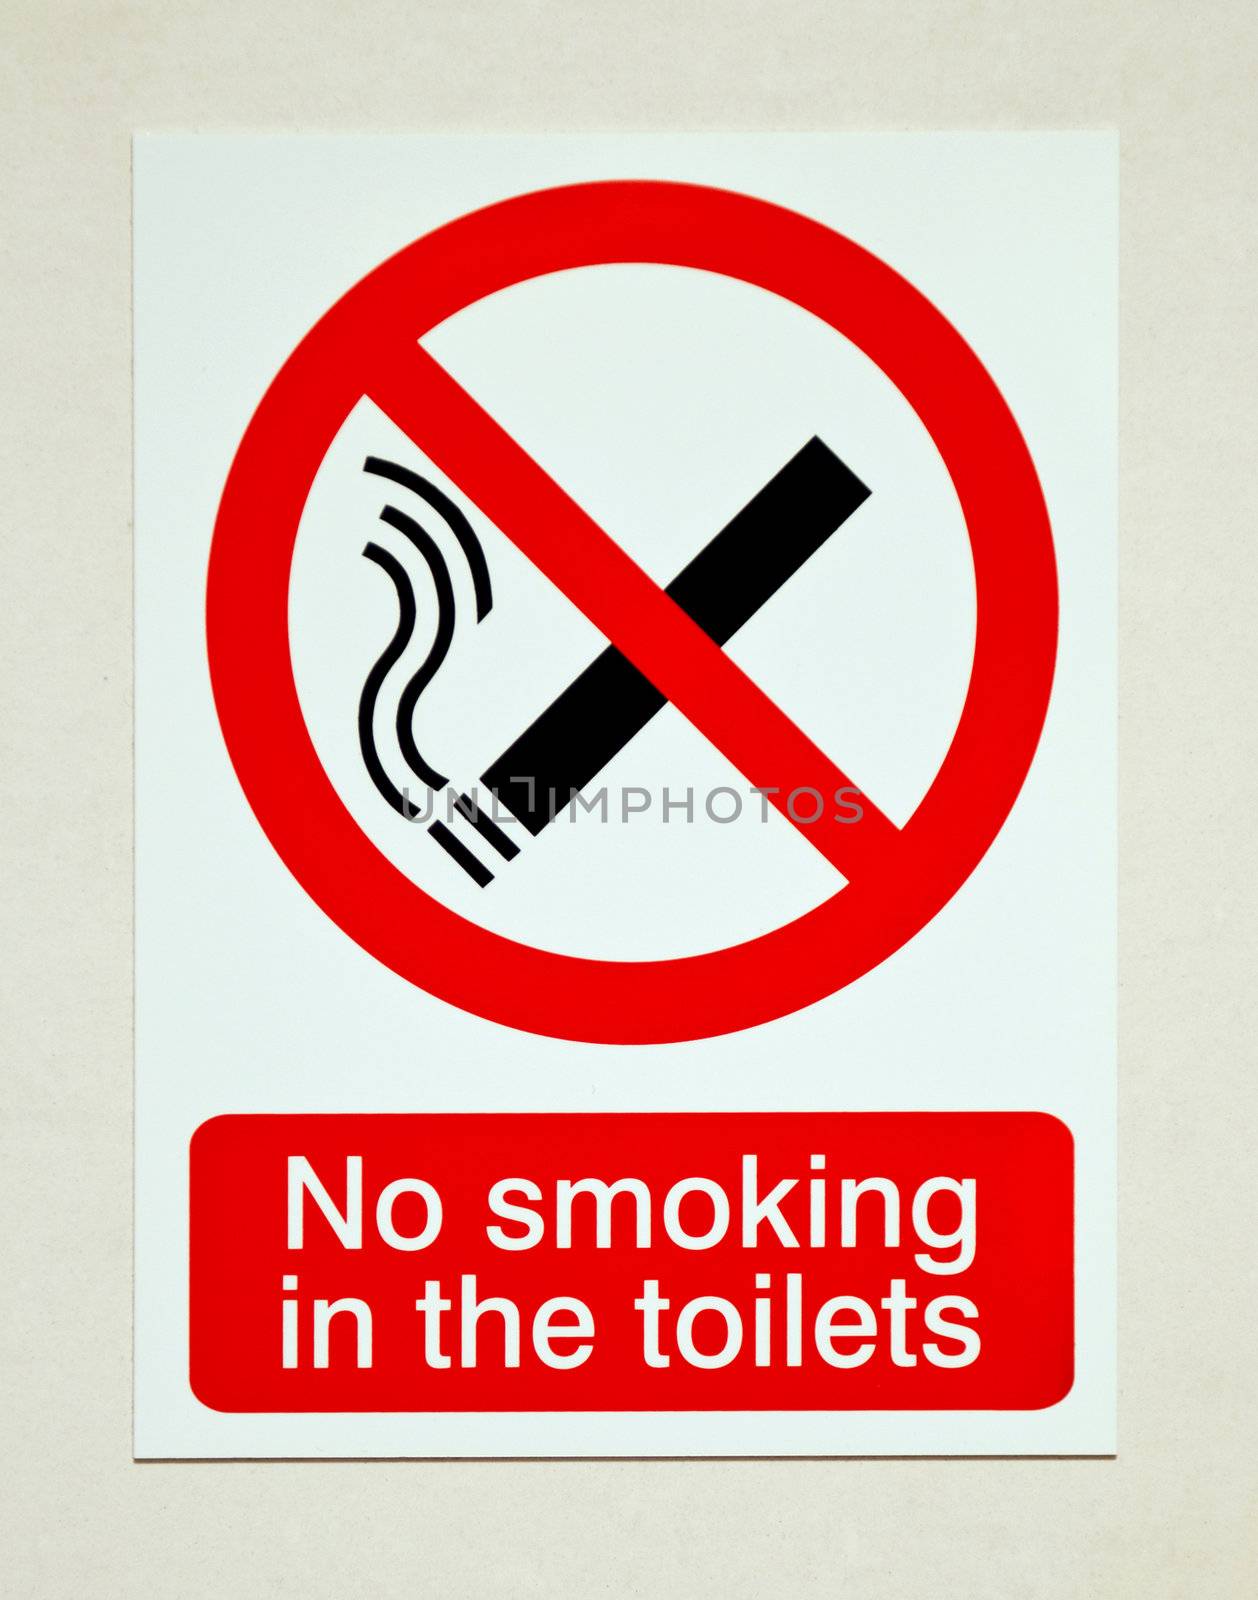 no smoking in the toilets sign on white wall